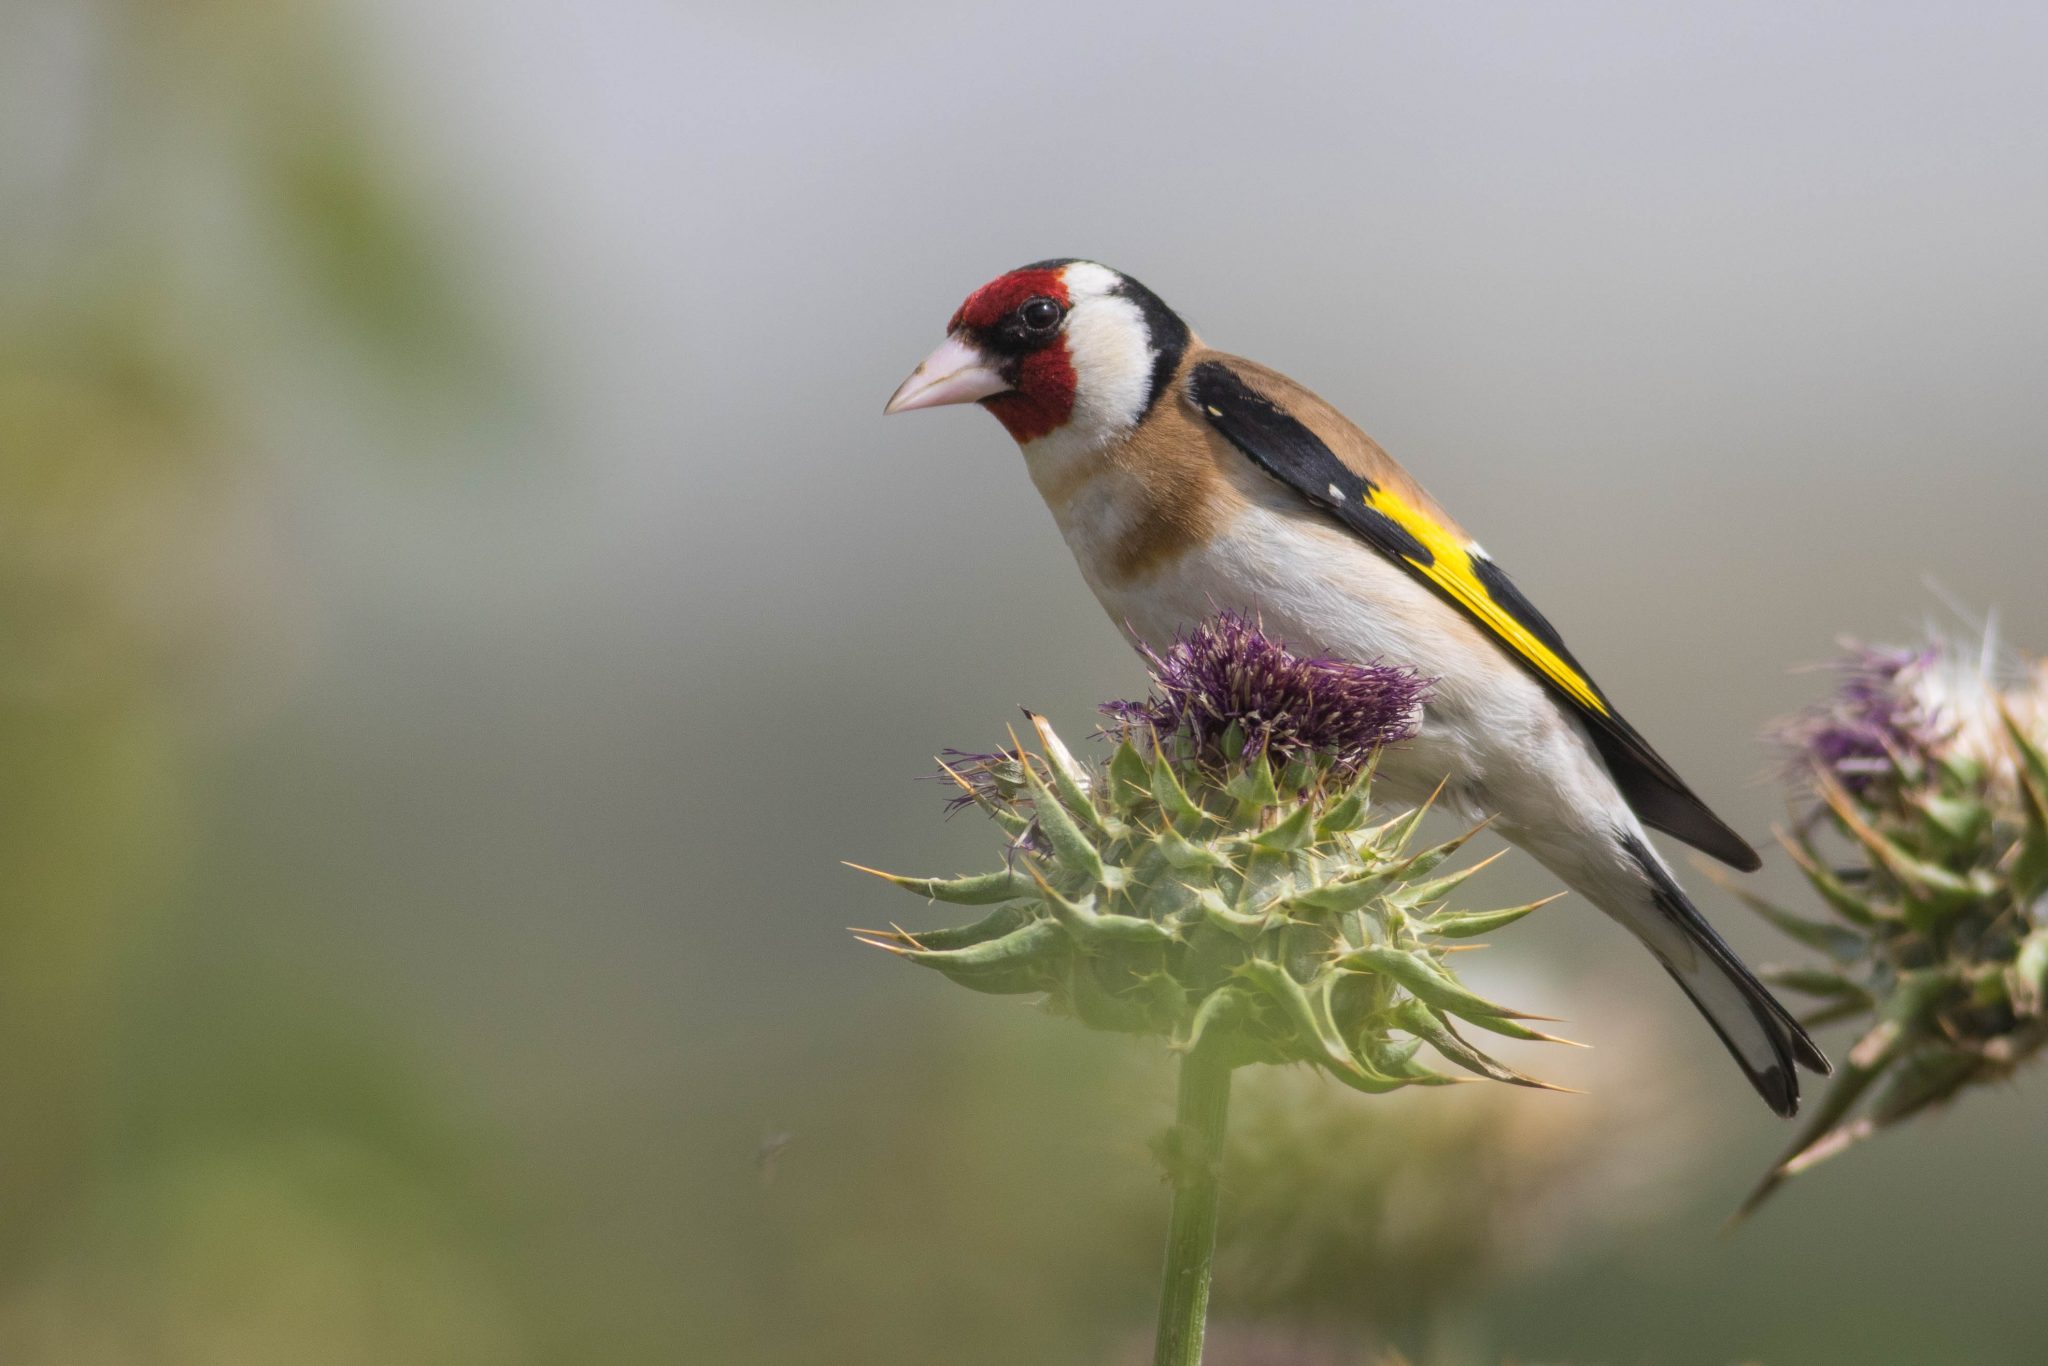 European goldfinch, one of the many species of birds that migrate to Israel's negev during the winter months